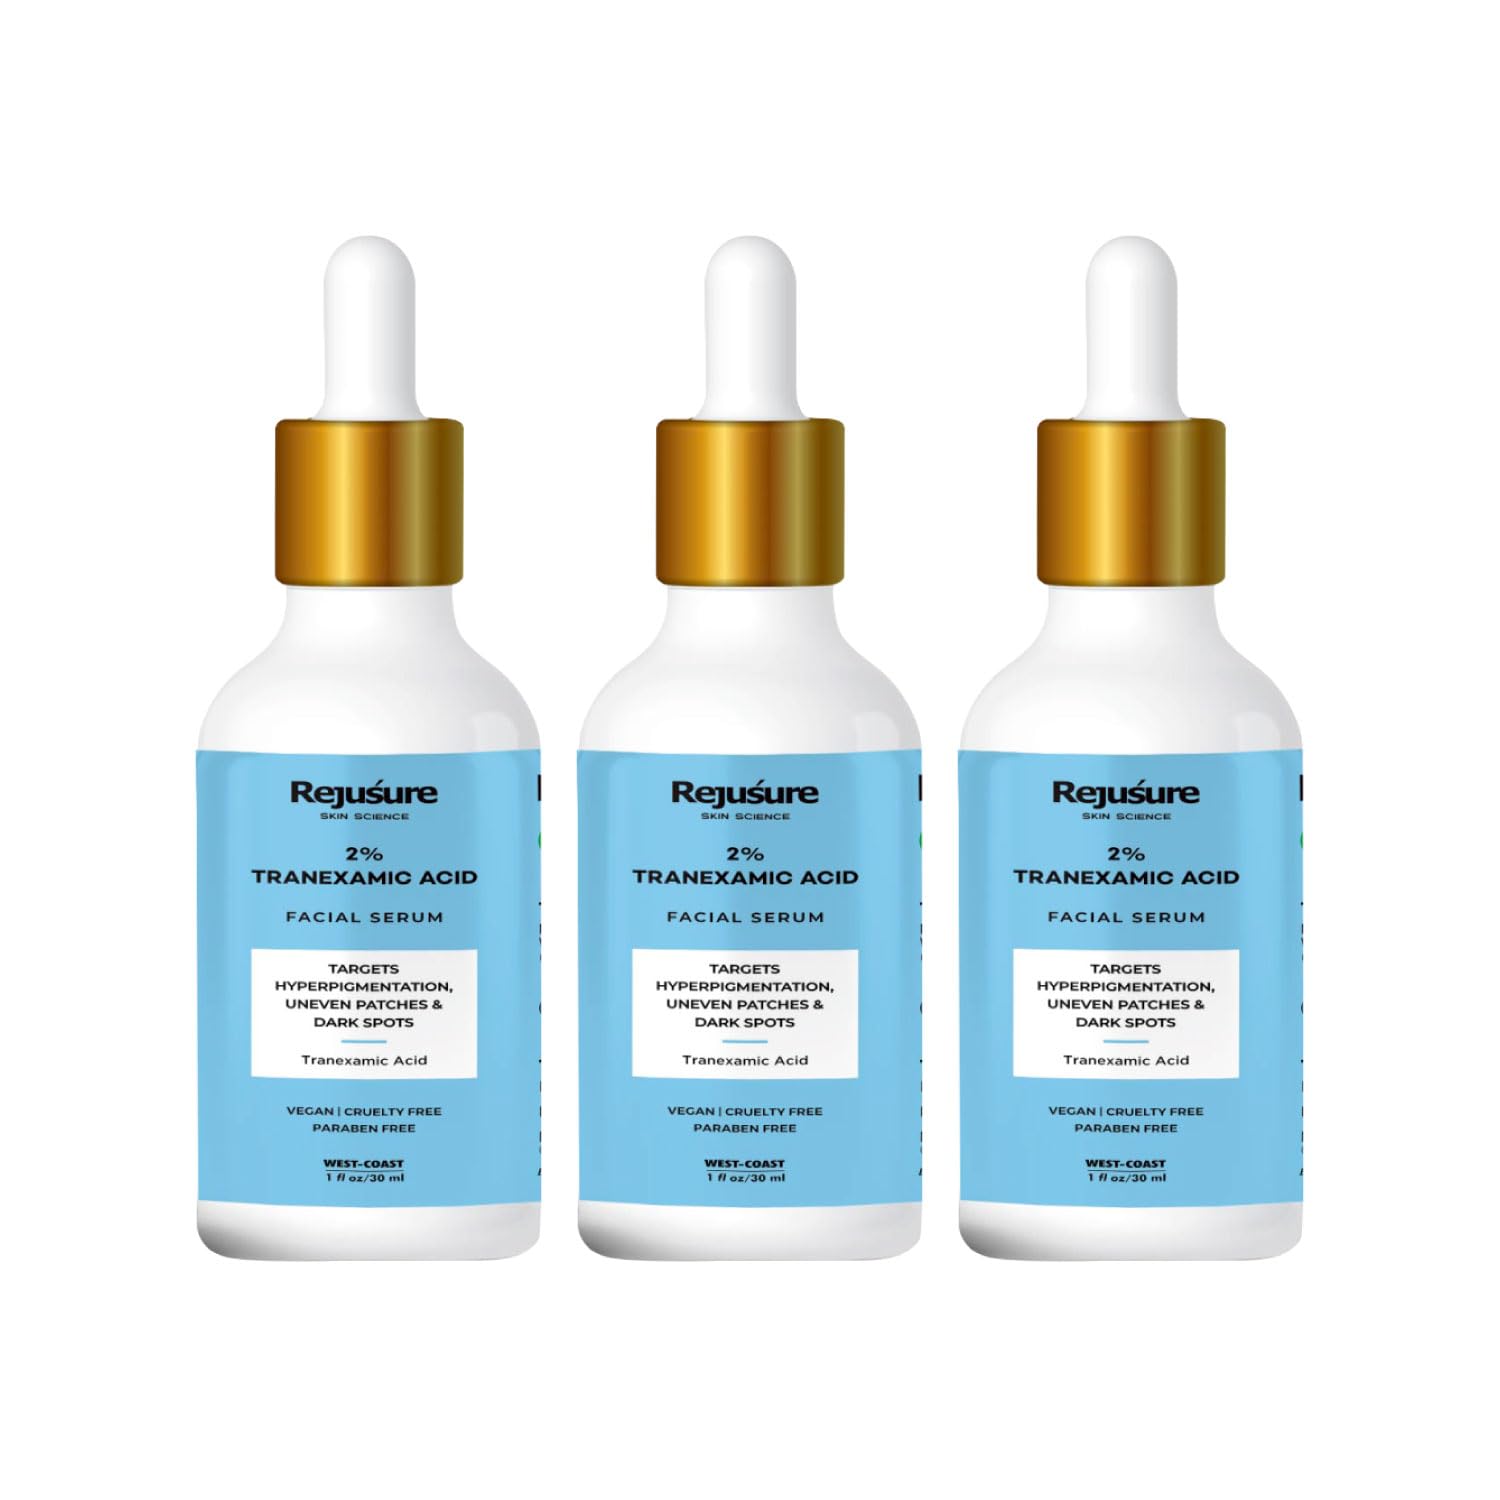 Rejusure Tranexamic Acid 2% Face Serum for Hyperpigmentation, Uneven Patches & Dark Spots – 30ml (Pack of 3)